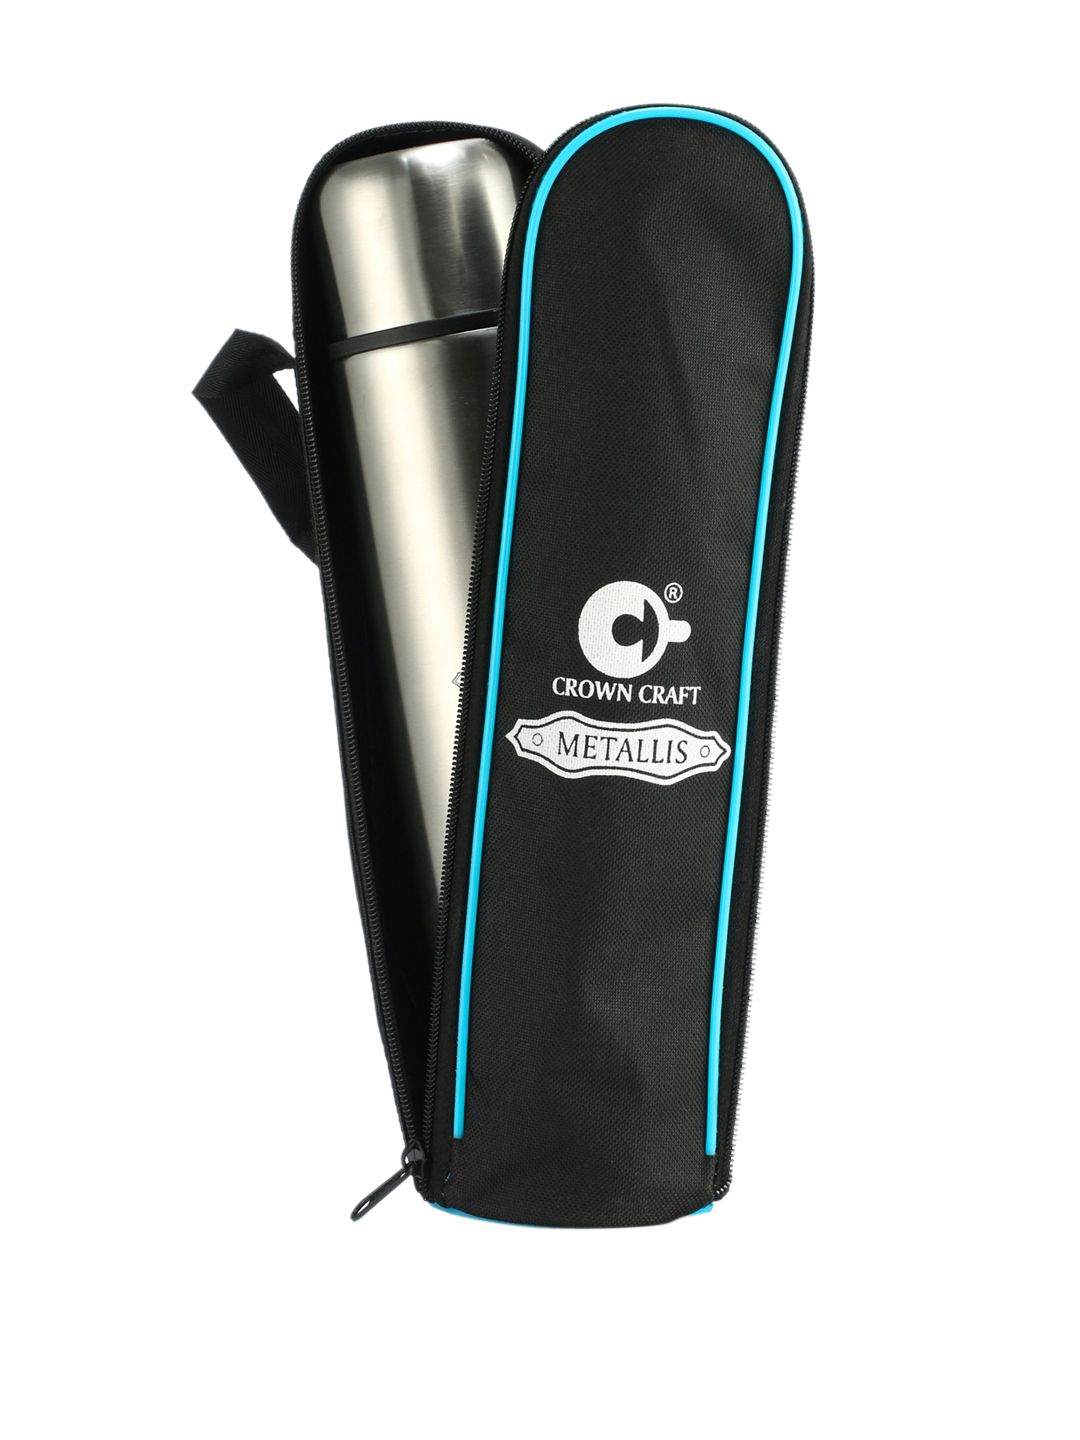 Crown Craft Silver-Toned Stainless Steel Vacuum Flask 1000ml Bottle Price in India